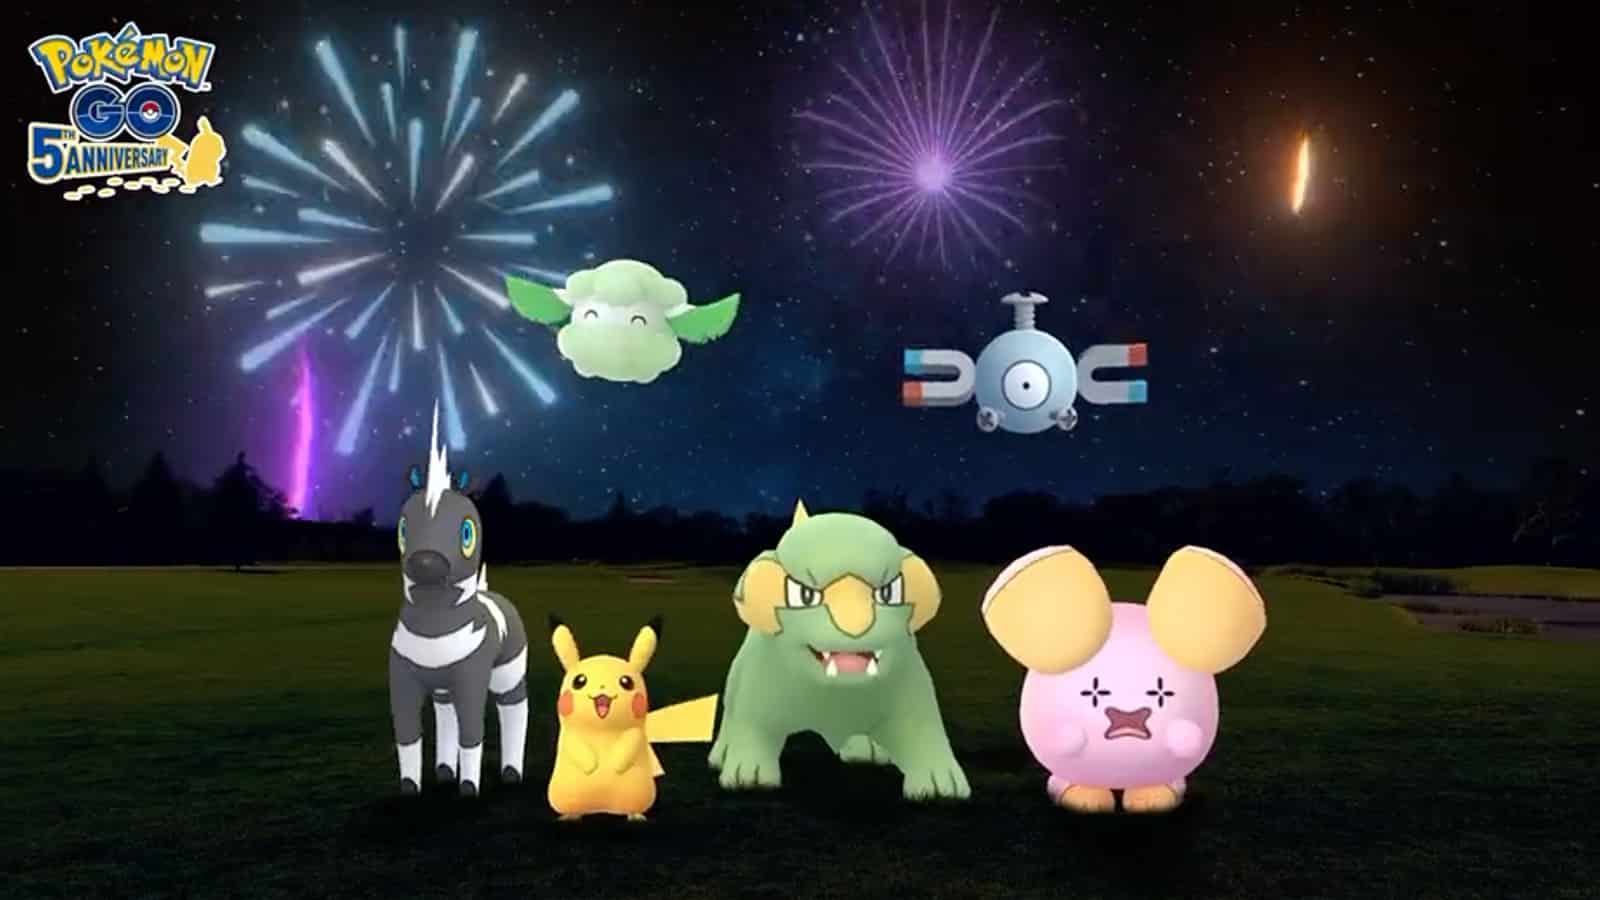 Fireworks exploding above Pikachu and friends in Pokemon Go